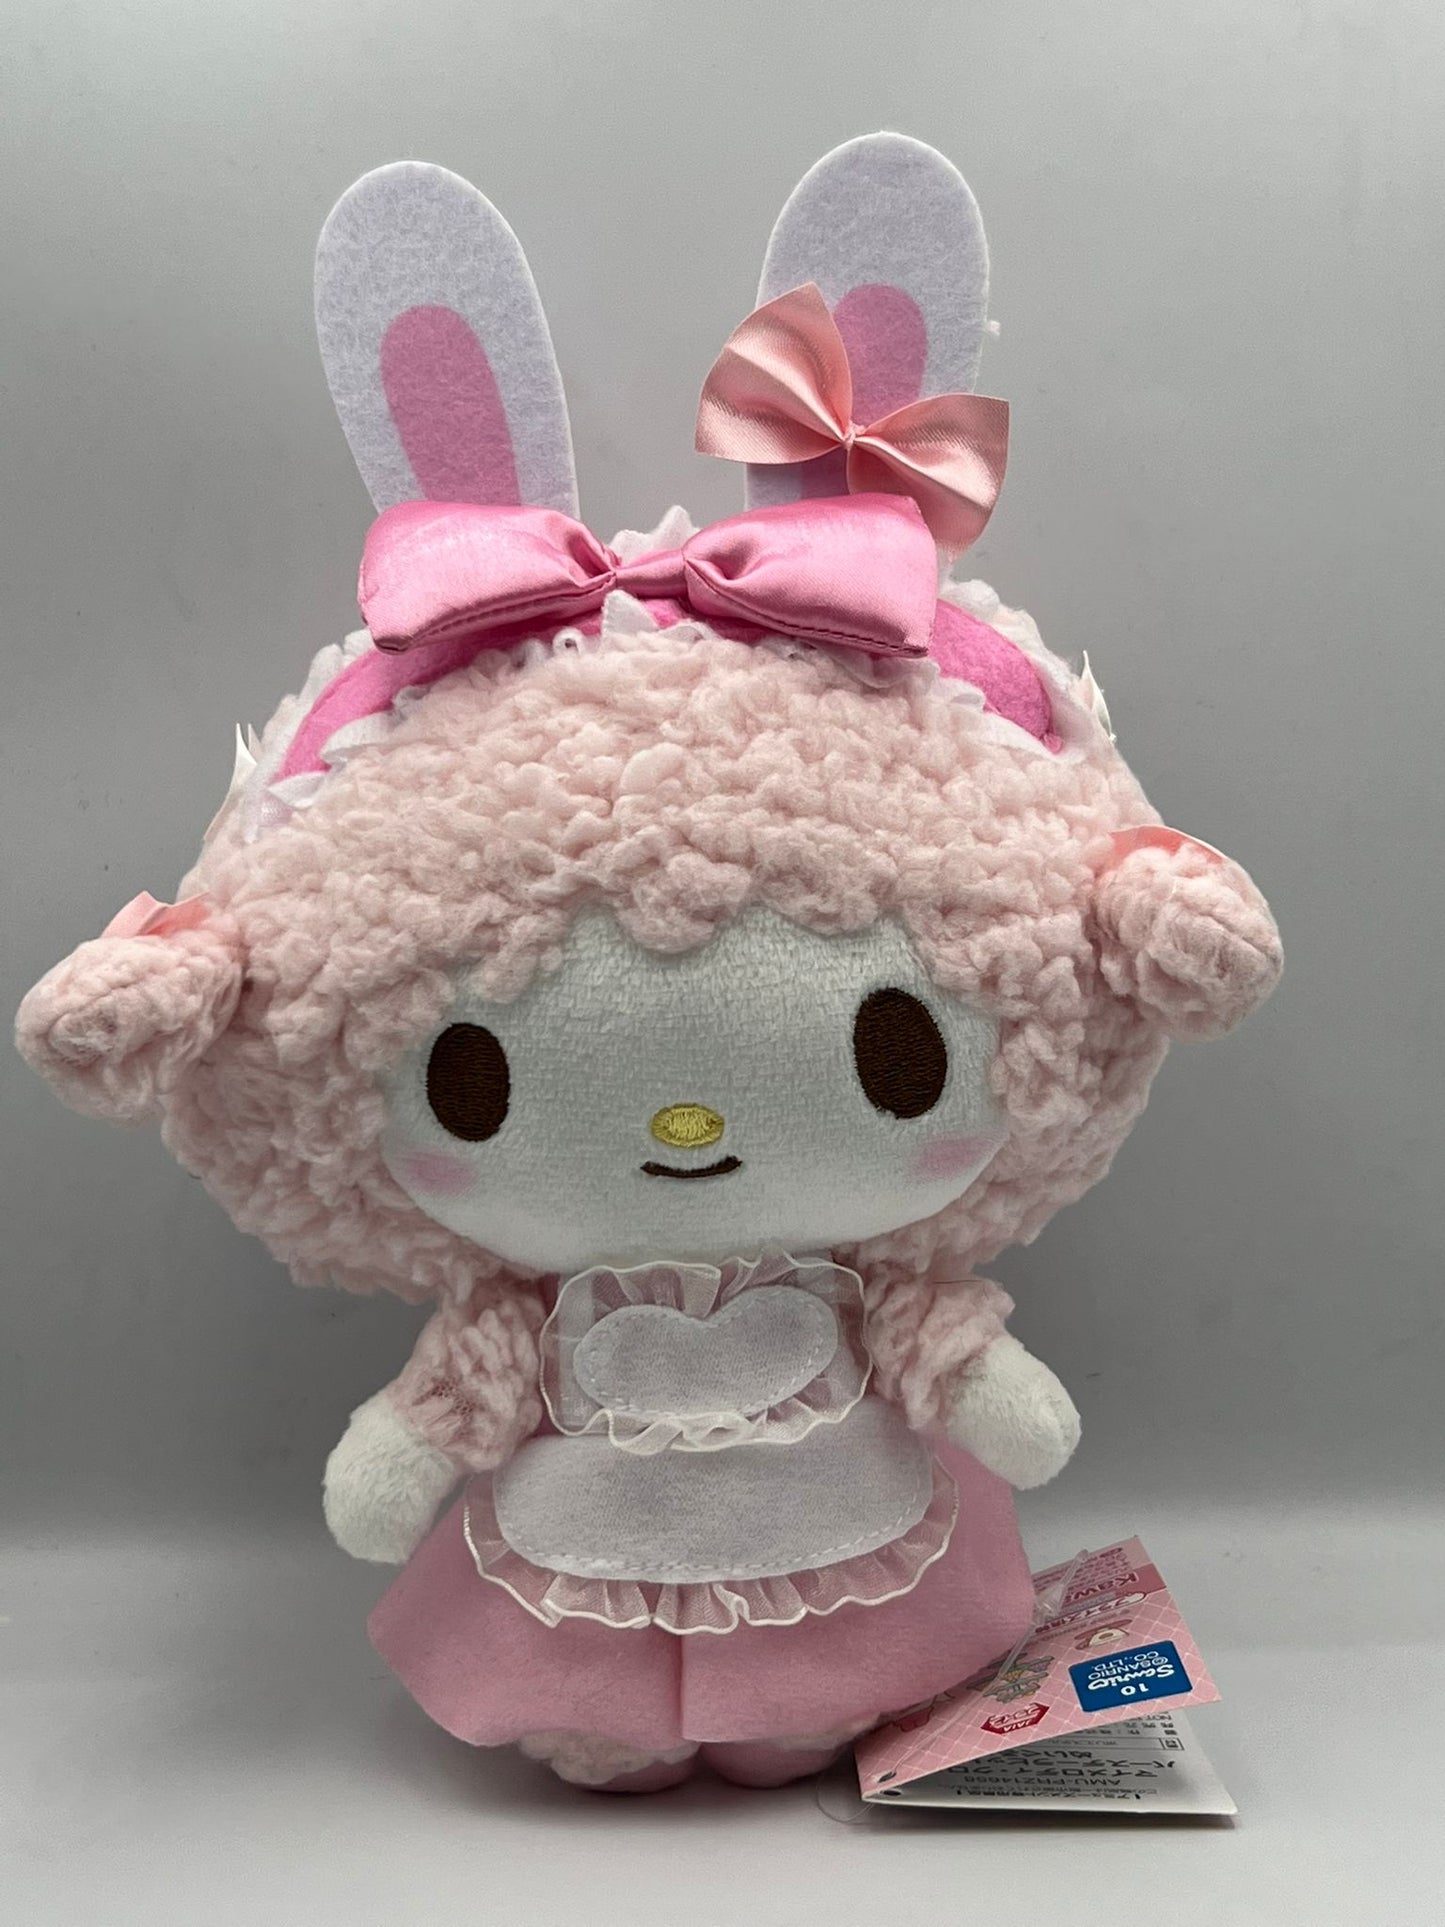 Sanrio My Melody Stuffed Toy "C" Authentic